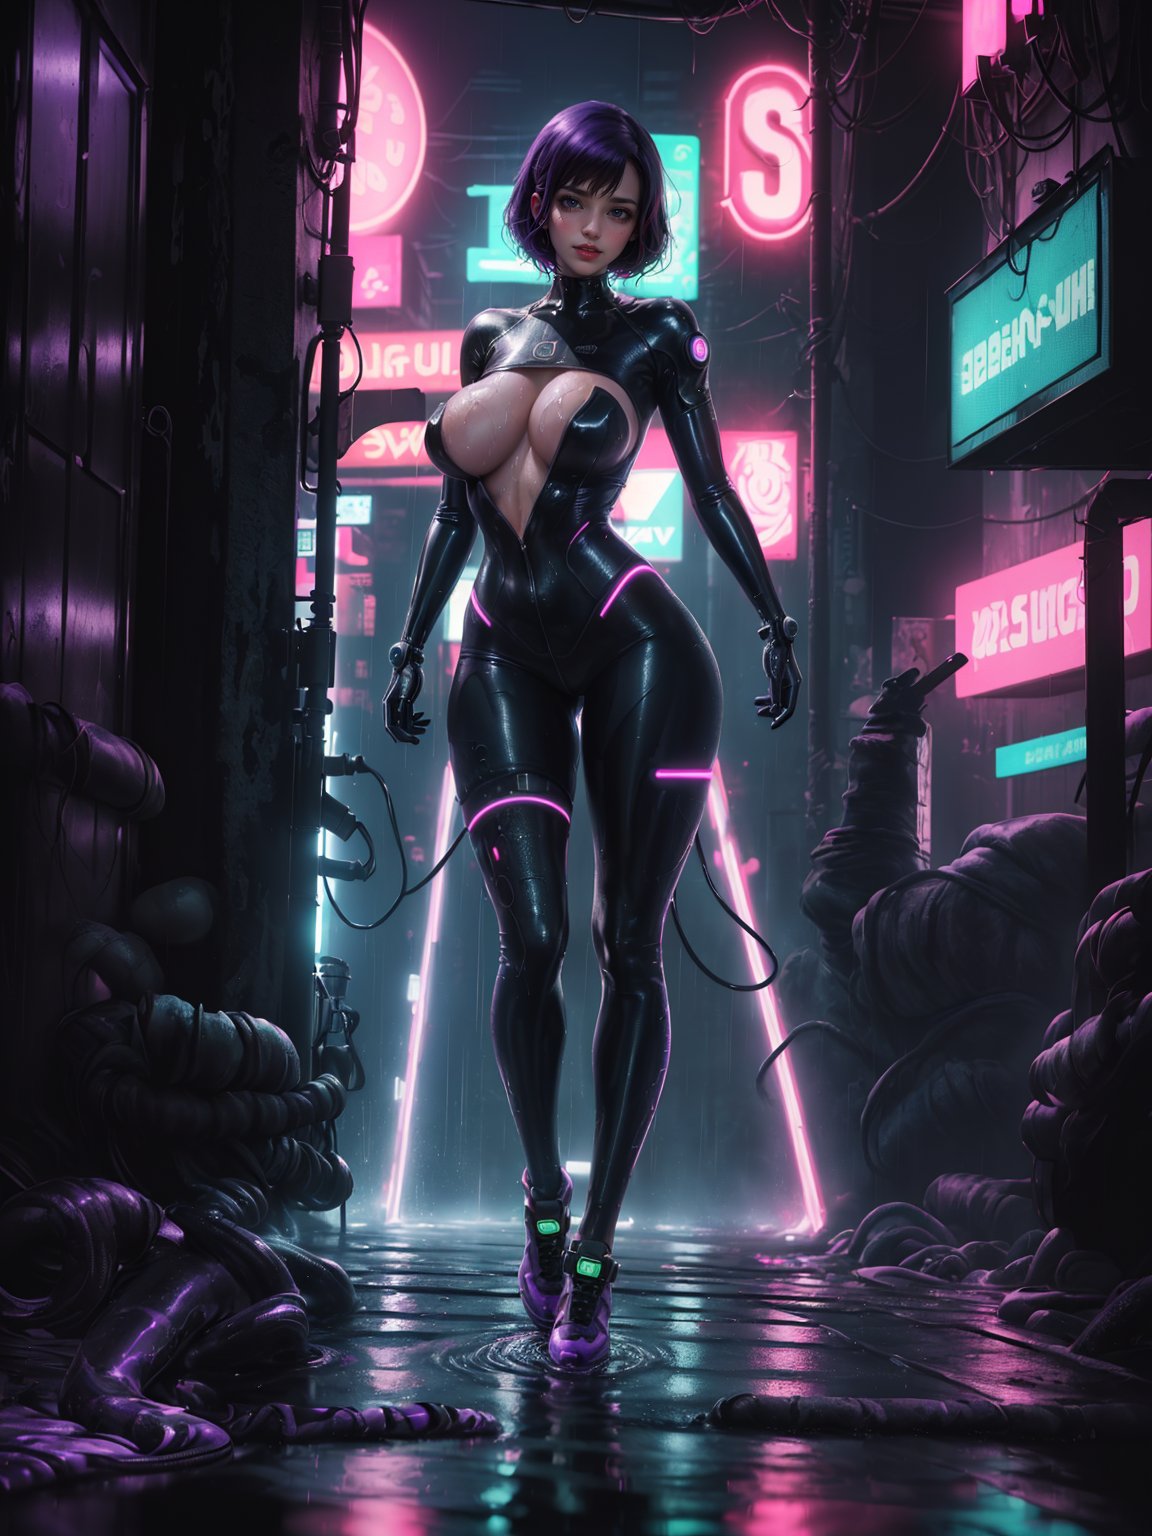 ((Full body):2) {((30 year old woman only):2)}:{((wearing black cyberpunk costume with neon lights extremely tight and tight on the body, semi transparent):1.5), (( extremely large breasts):1.5), only she has ((very short purple hair, green eyes):1.5), ((looking at viewer, maniacal smile):1.5), She has ((body/suit all soaked of water):1.4) she is doing ((erotic pose):1.5)}; {Background:In a futuristic city raining heavily, she is in front of a(futuristic car traffic):1.5)}, Hyperrealism, 16k, ((best quality, high details):1.4), anatomically correct, masterpiece , UHD